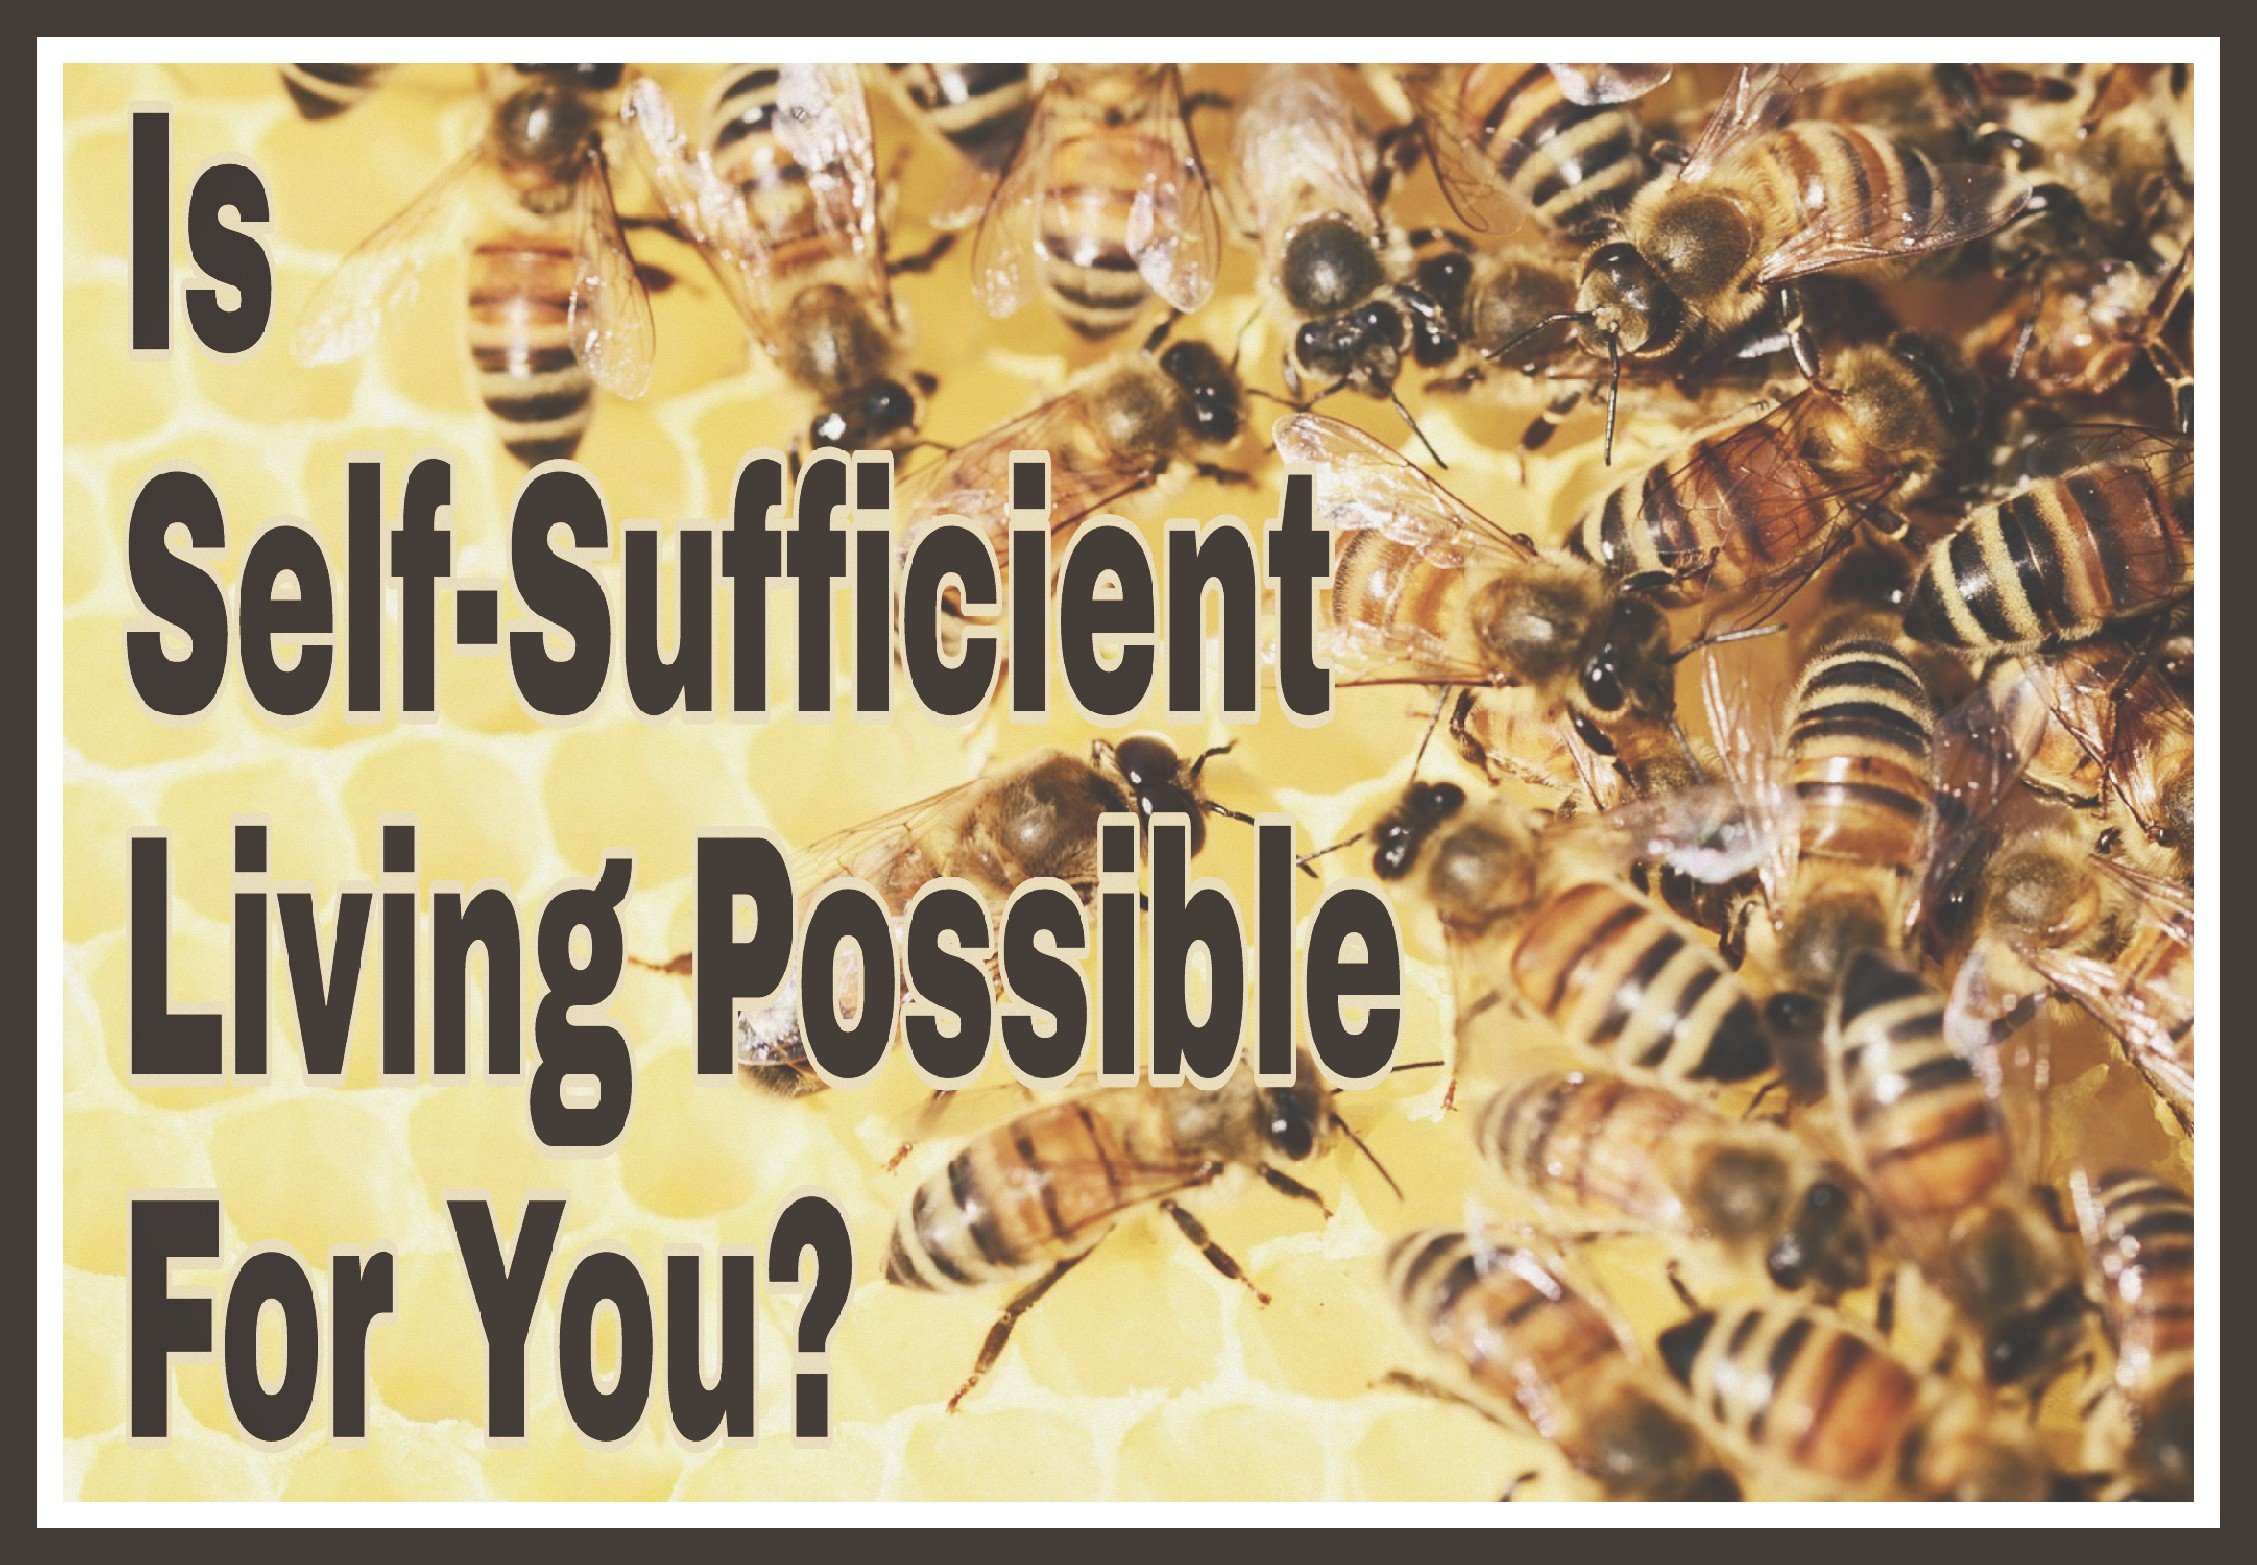 Is Self-Sufficient Living Possible For You? Title on background image of bees.